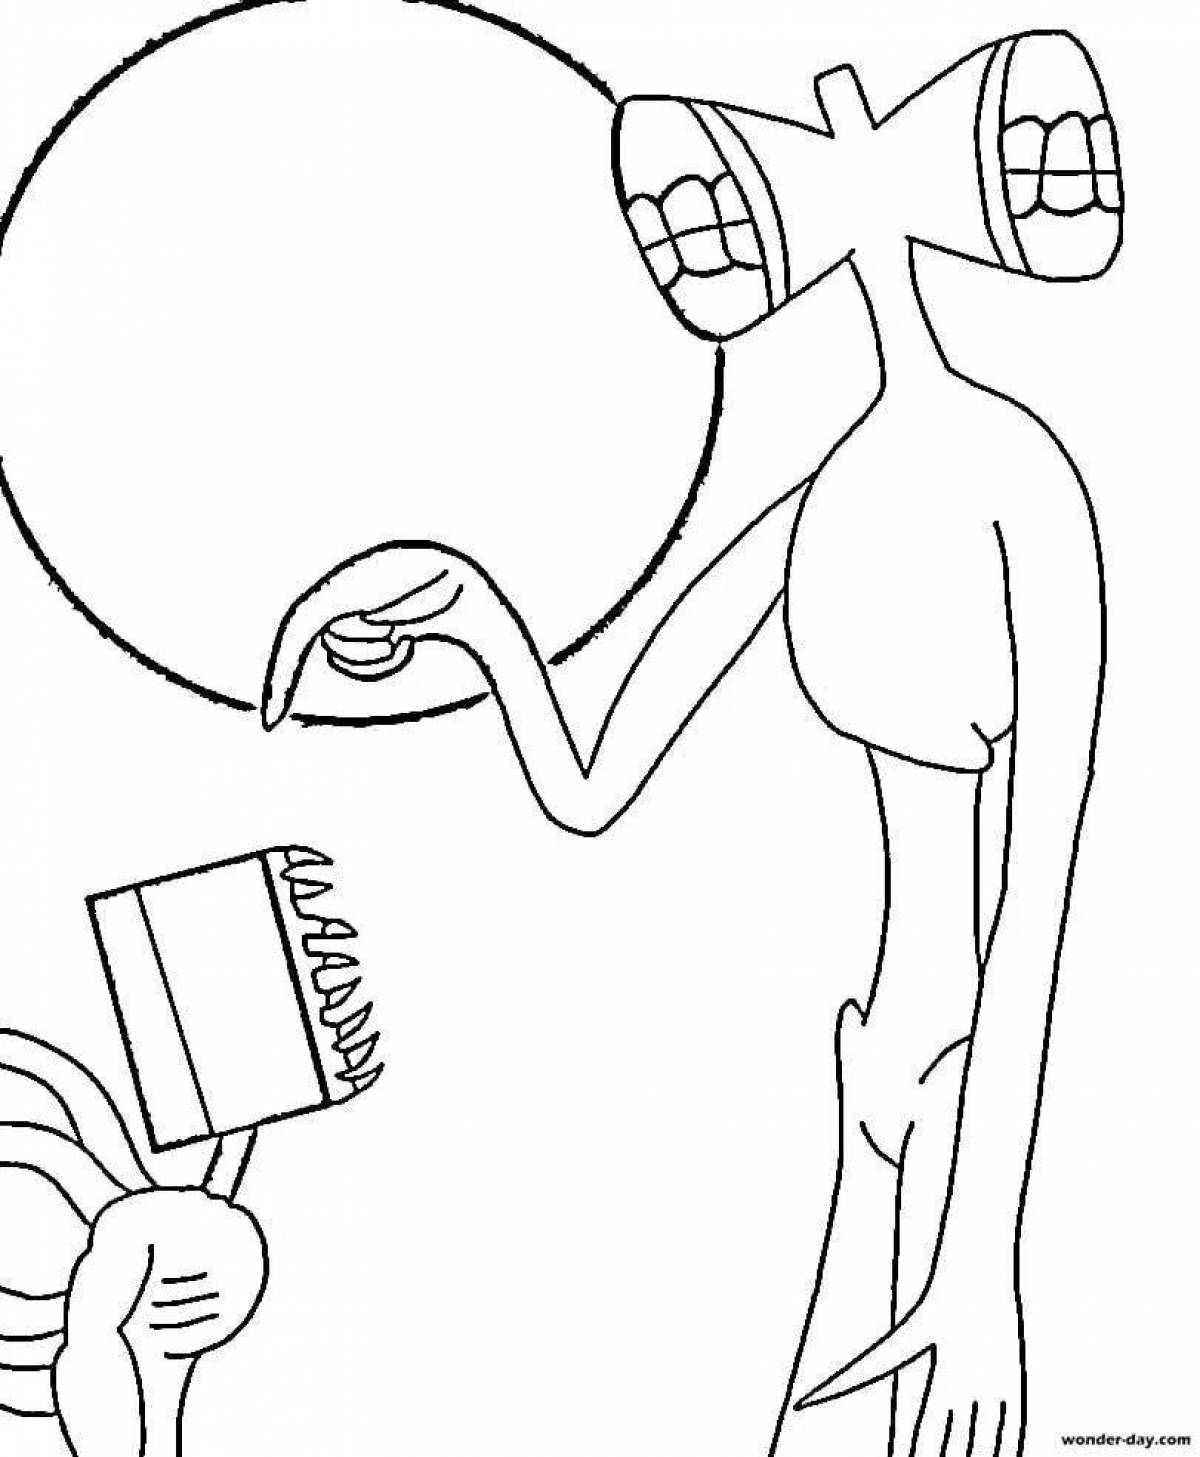 Creepy siren head monster coloring page